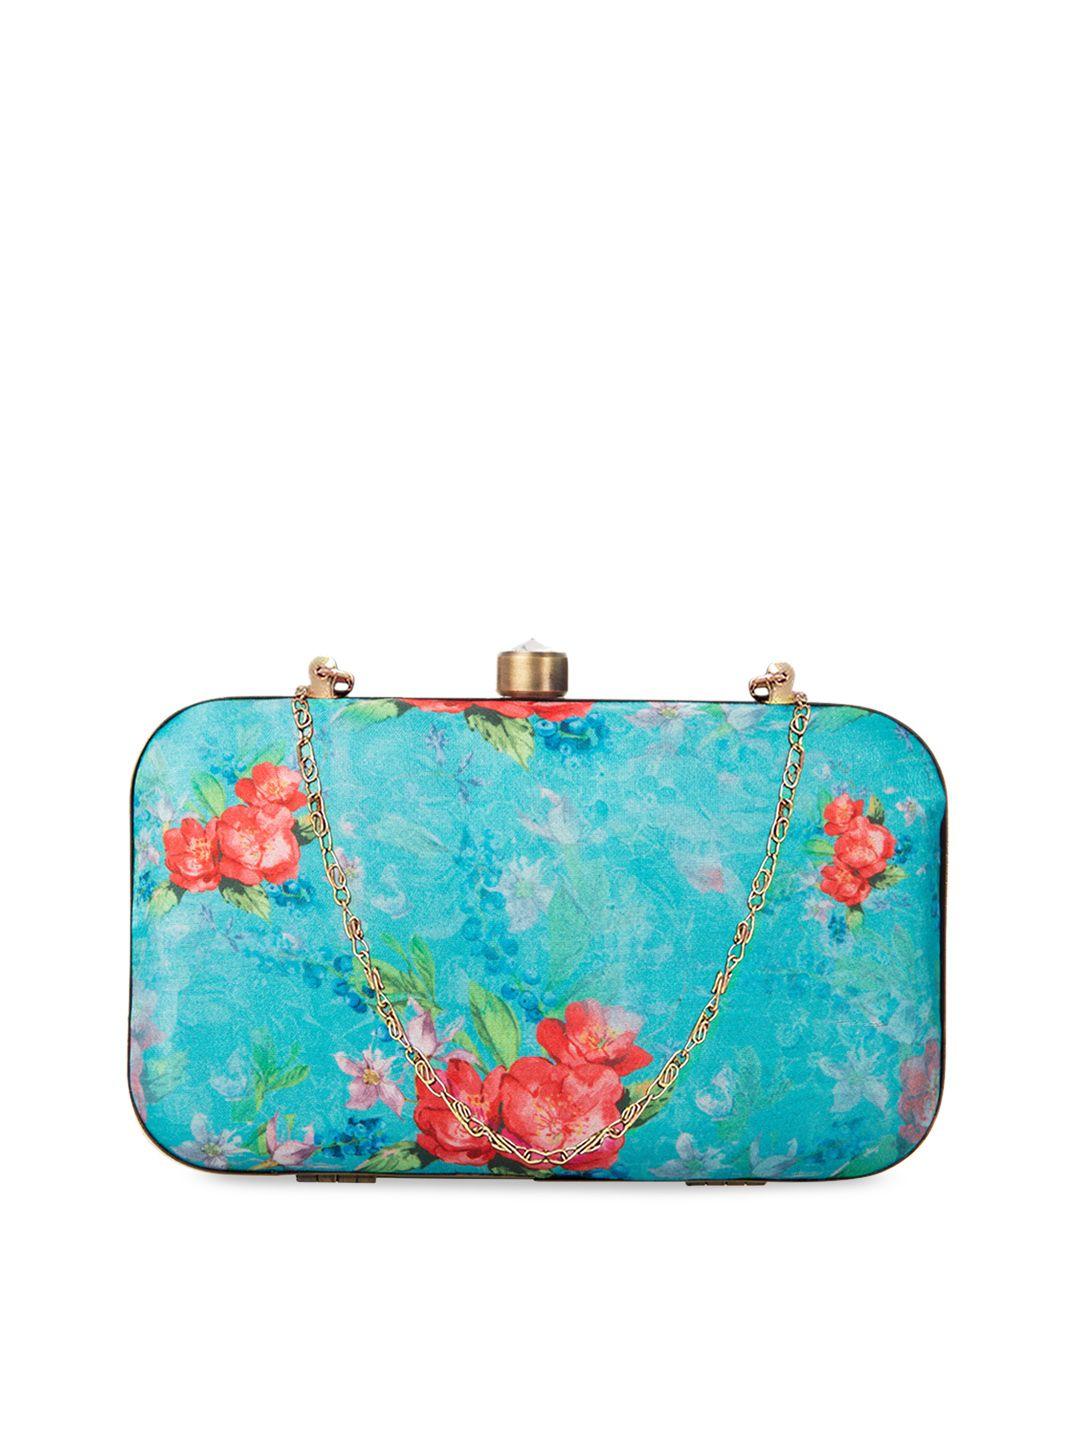 parizaat by shadab khan turquoise blue & green printed  clutch